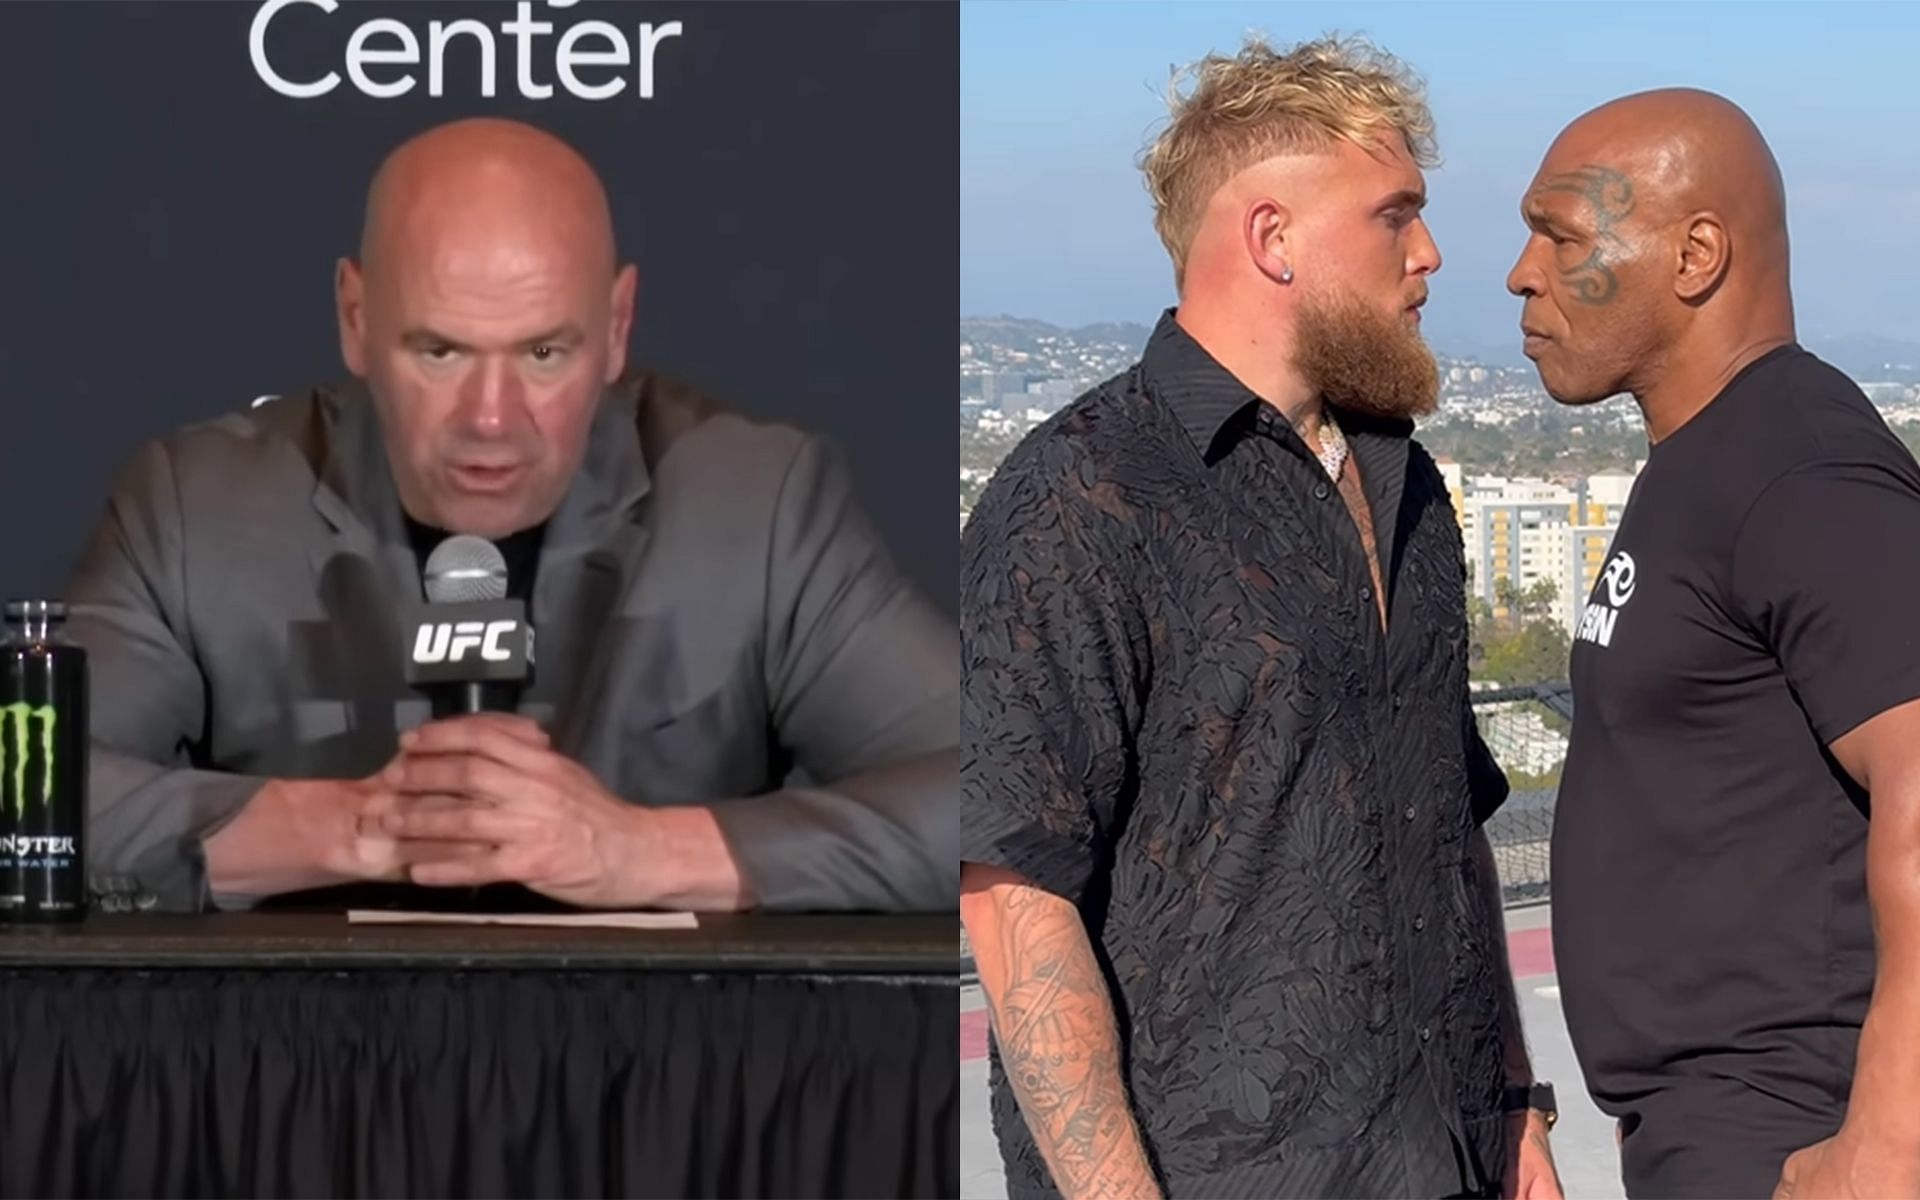 Dana White (left) shares his thoughts on Jake Paul vs. Mike Tyson (right) [Images Courtesy: @jakepaul Instagram and UFC YouTube]